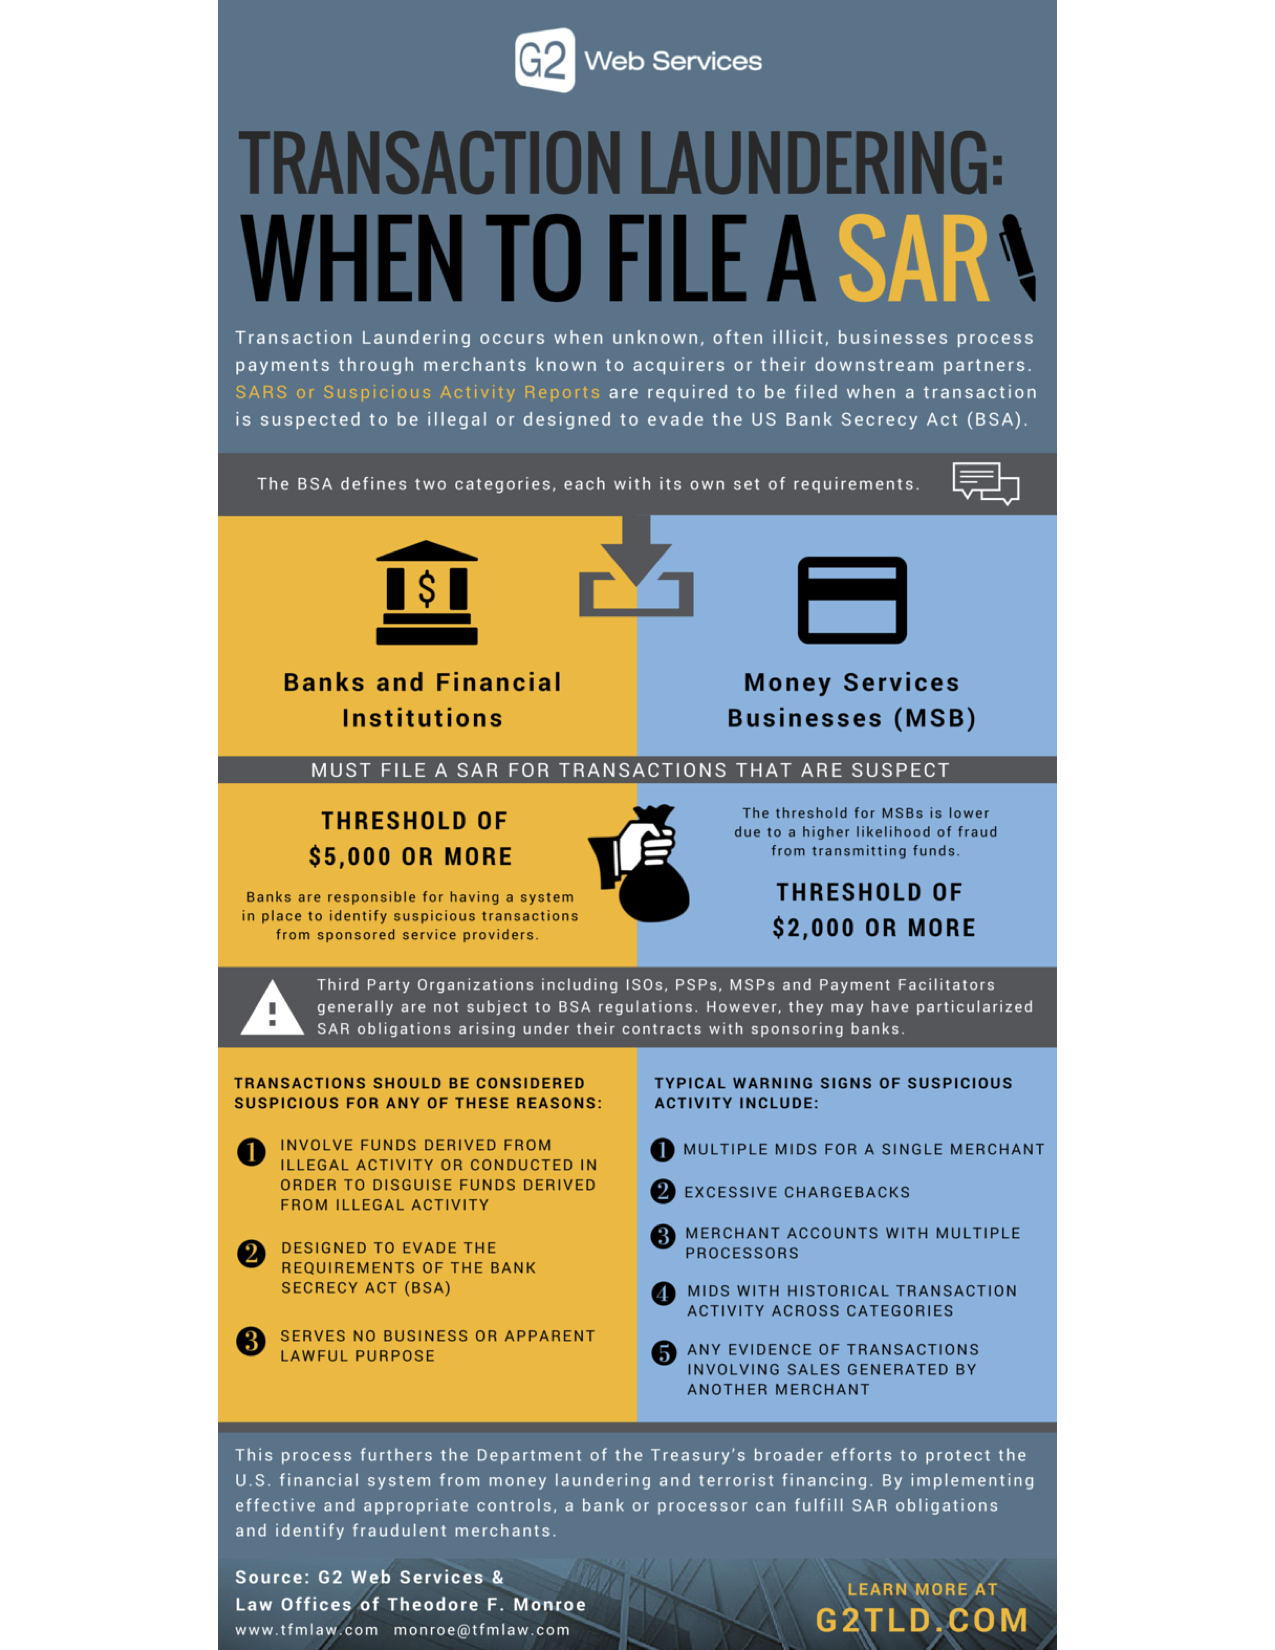 G2 Web Services SARS Infographic